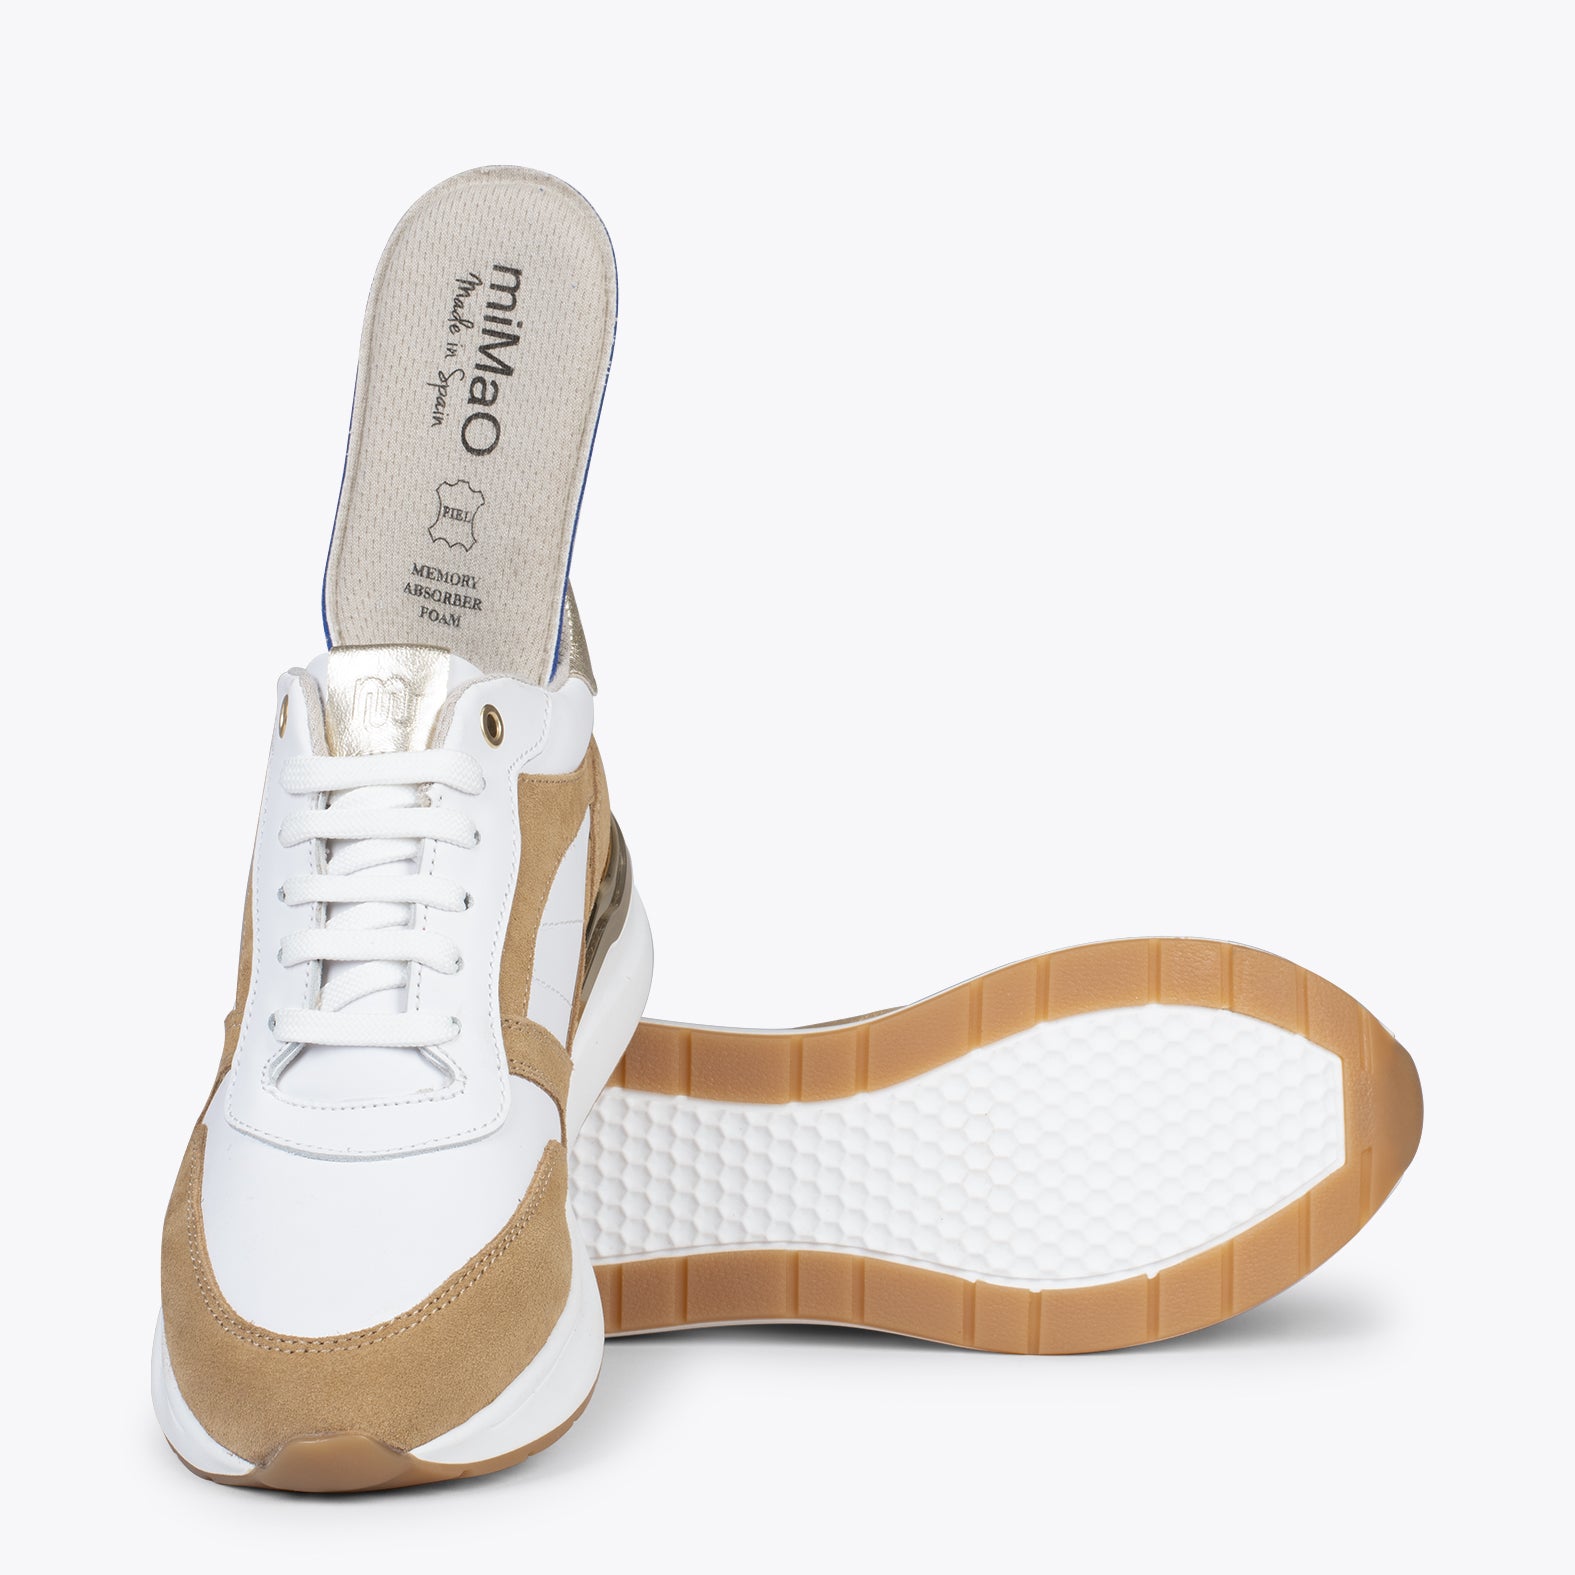 FREEDOM – BEIGE sneakers with removable insole